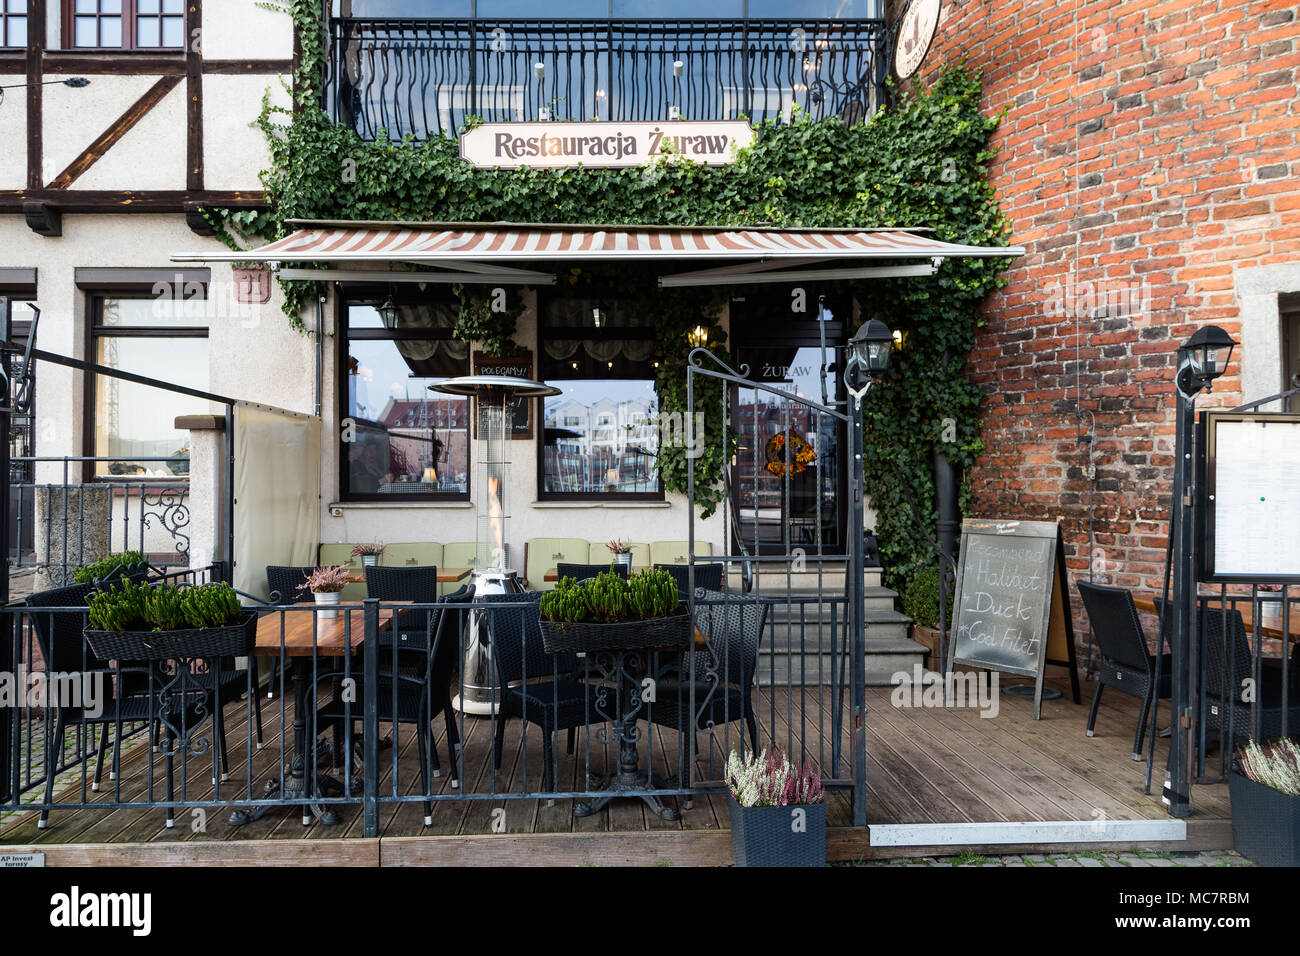 Exterior of a restaurant in Gdansk on the canal in the old town Stock Photo